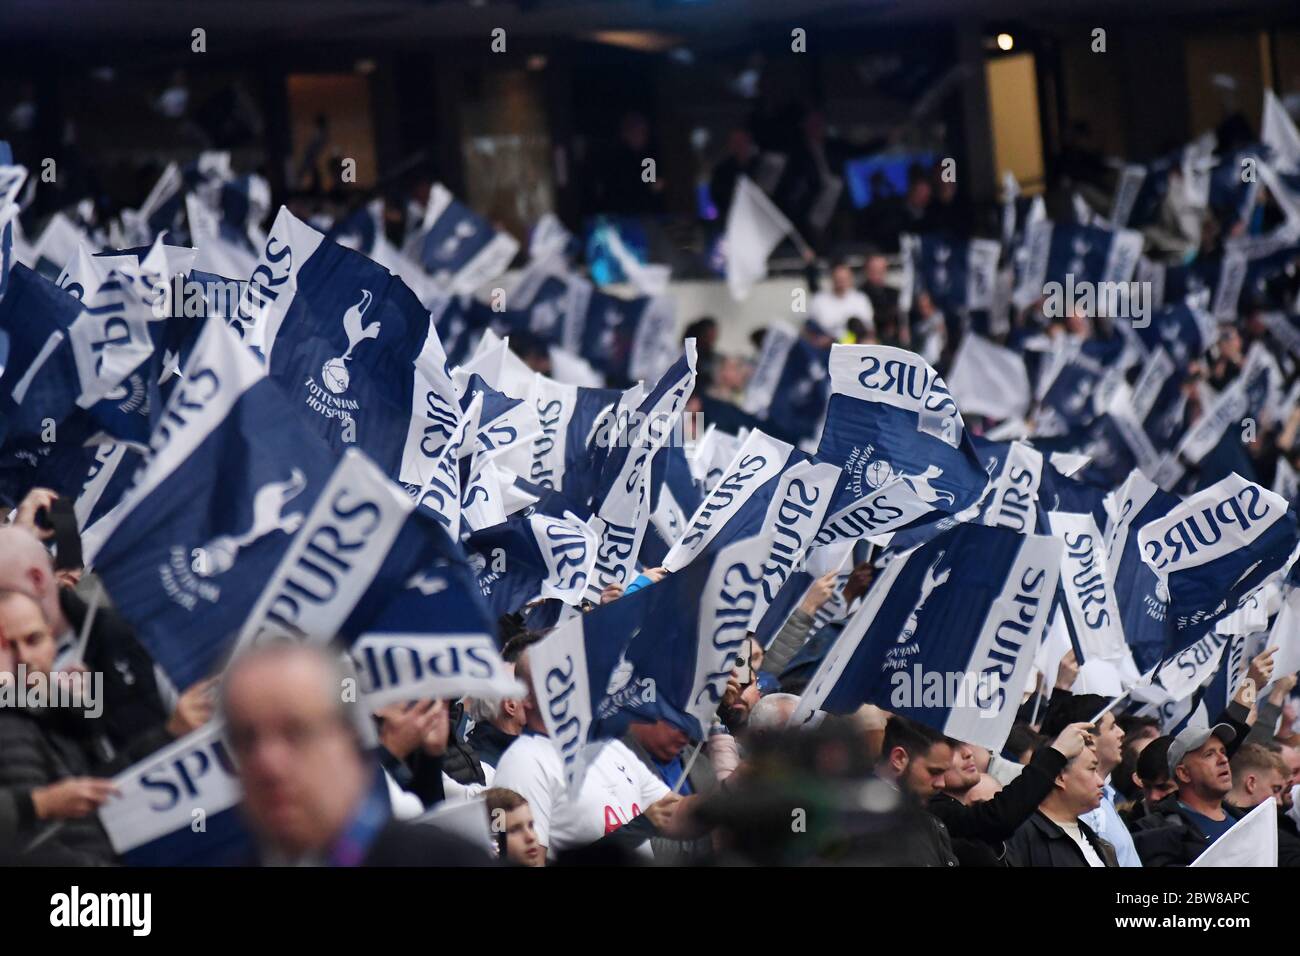 LONDON, ENGLAND - APRIL 30, 2019: Tottenham fans wave flags prior to he first leg of the 2018/19 UEFA Champions League Semi-finals game between Tottenham Hotspur (England) and AFC Ajax (Netherlands) at Tottenham Hotspur Stadium. Stock Photo